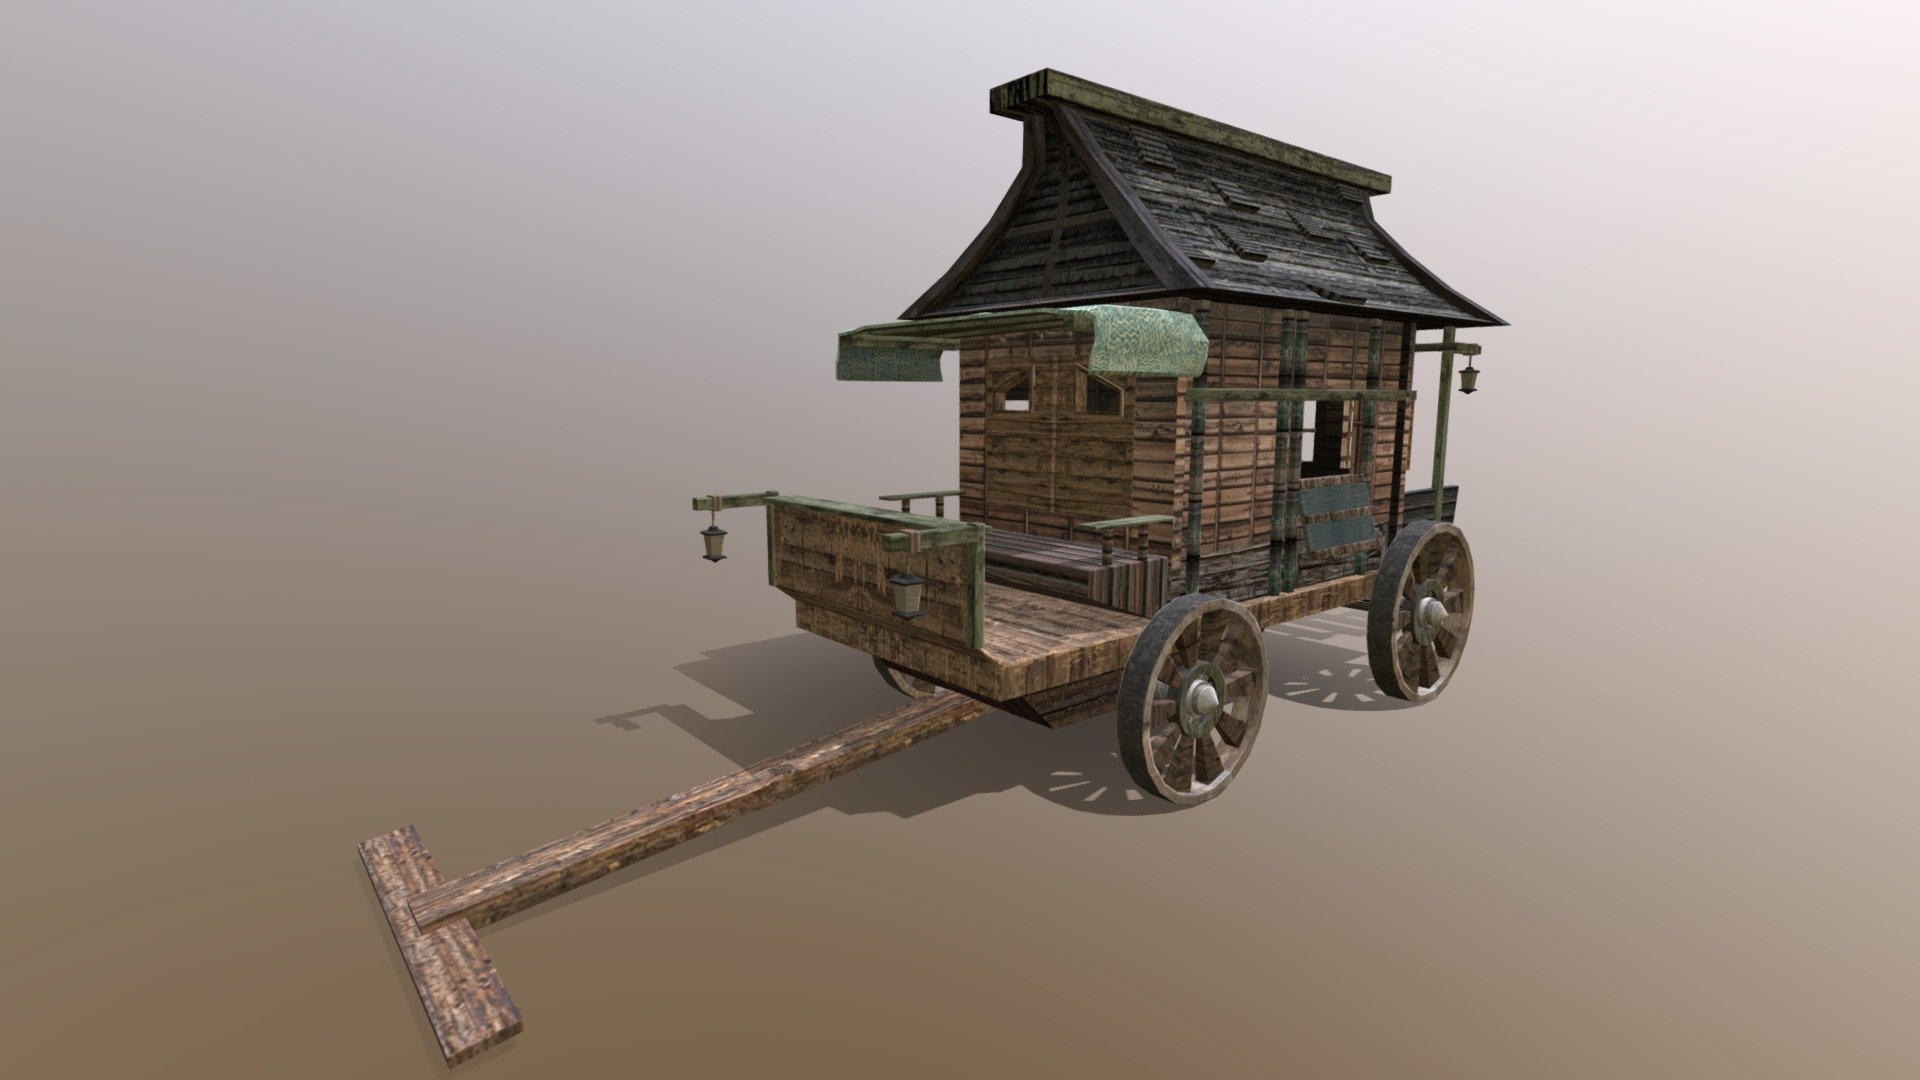 My most recent model for my school assignment, a medieval style cart - Medieval Cart - 3D model by Laikaios 3d model